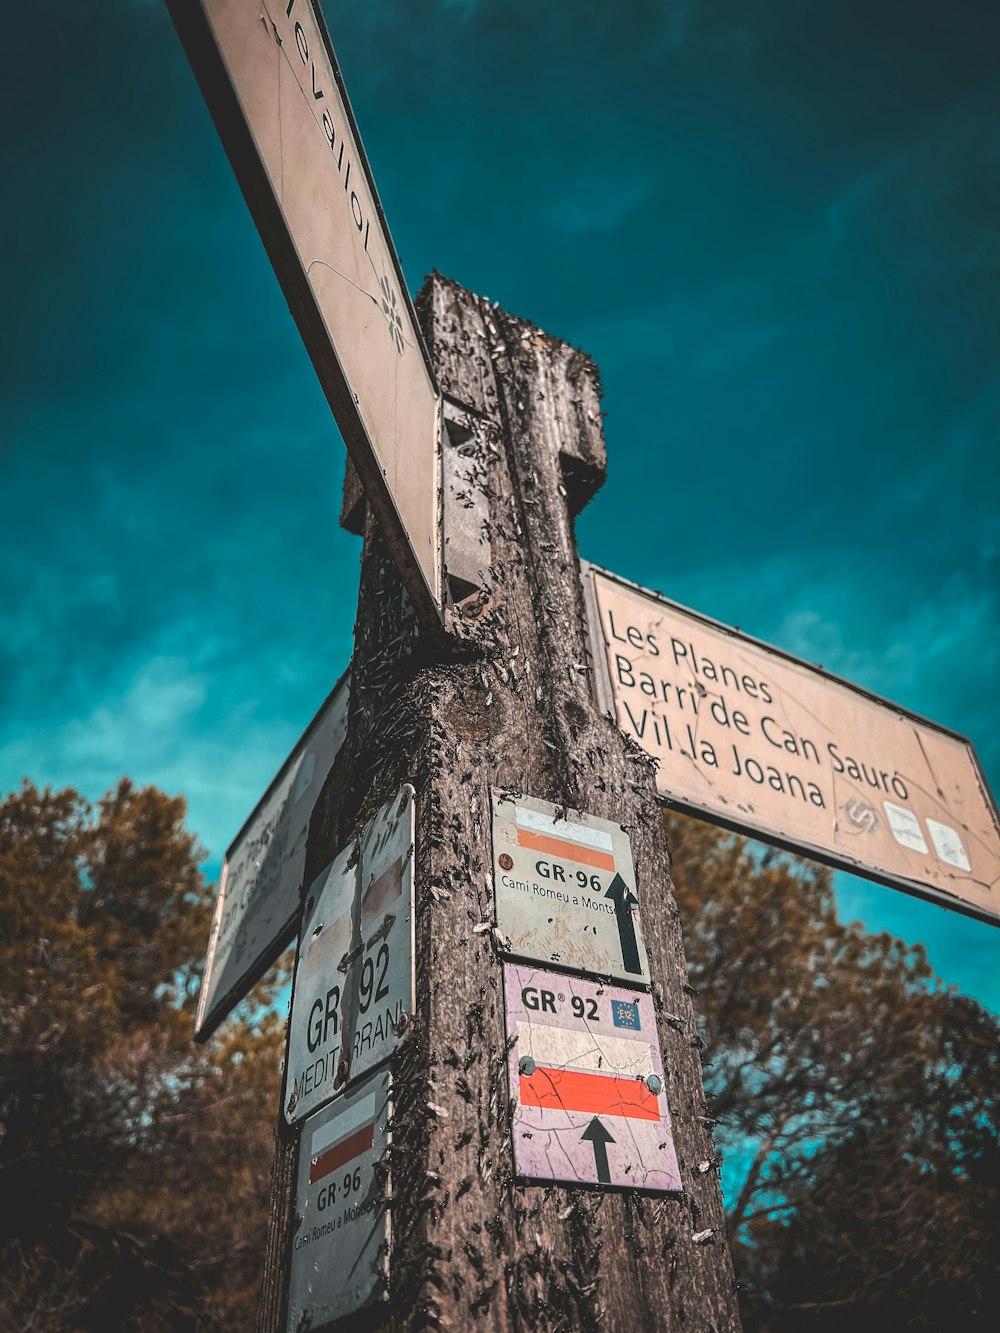 a wooden pole with street signs attached to it